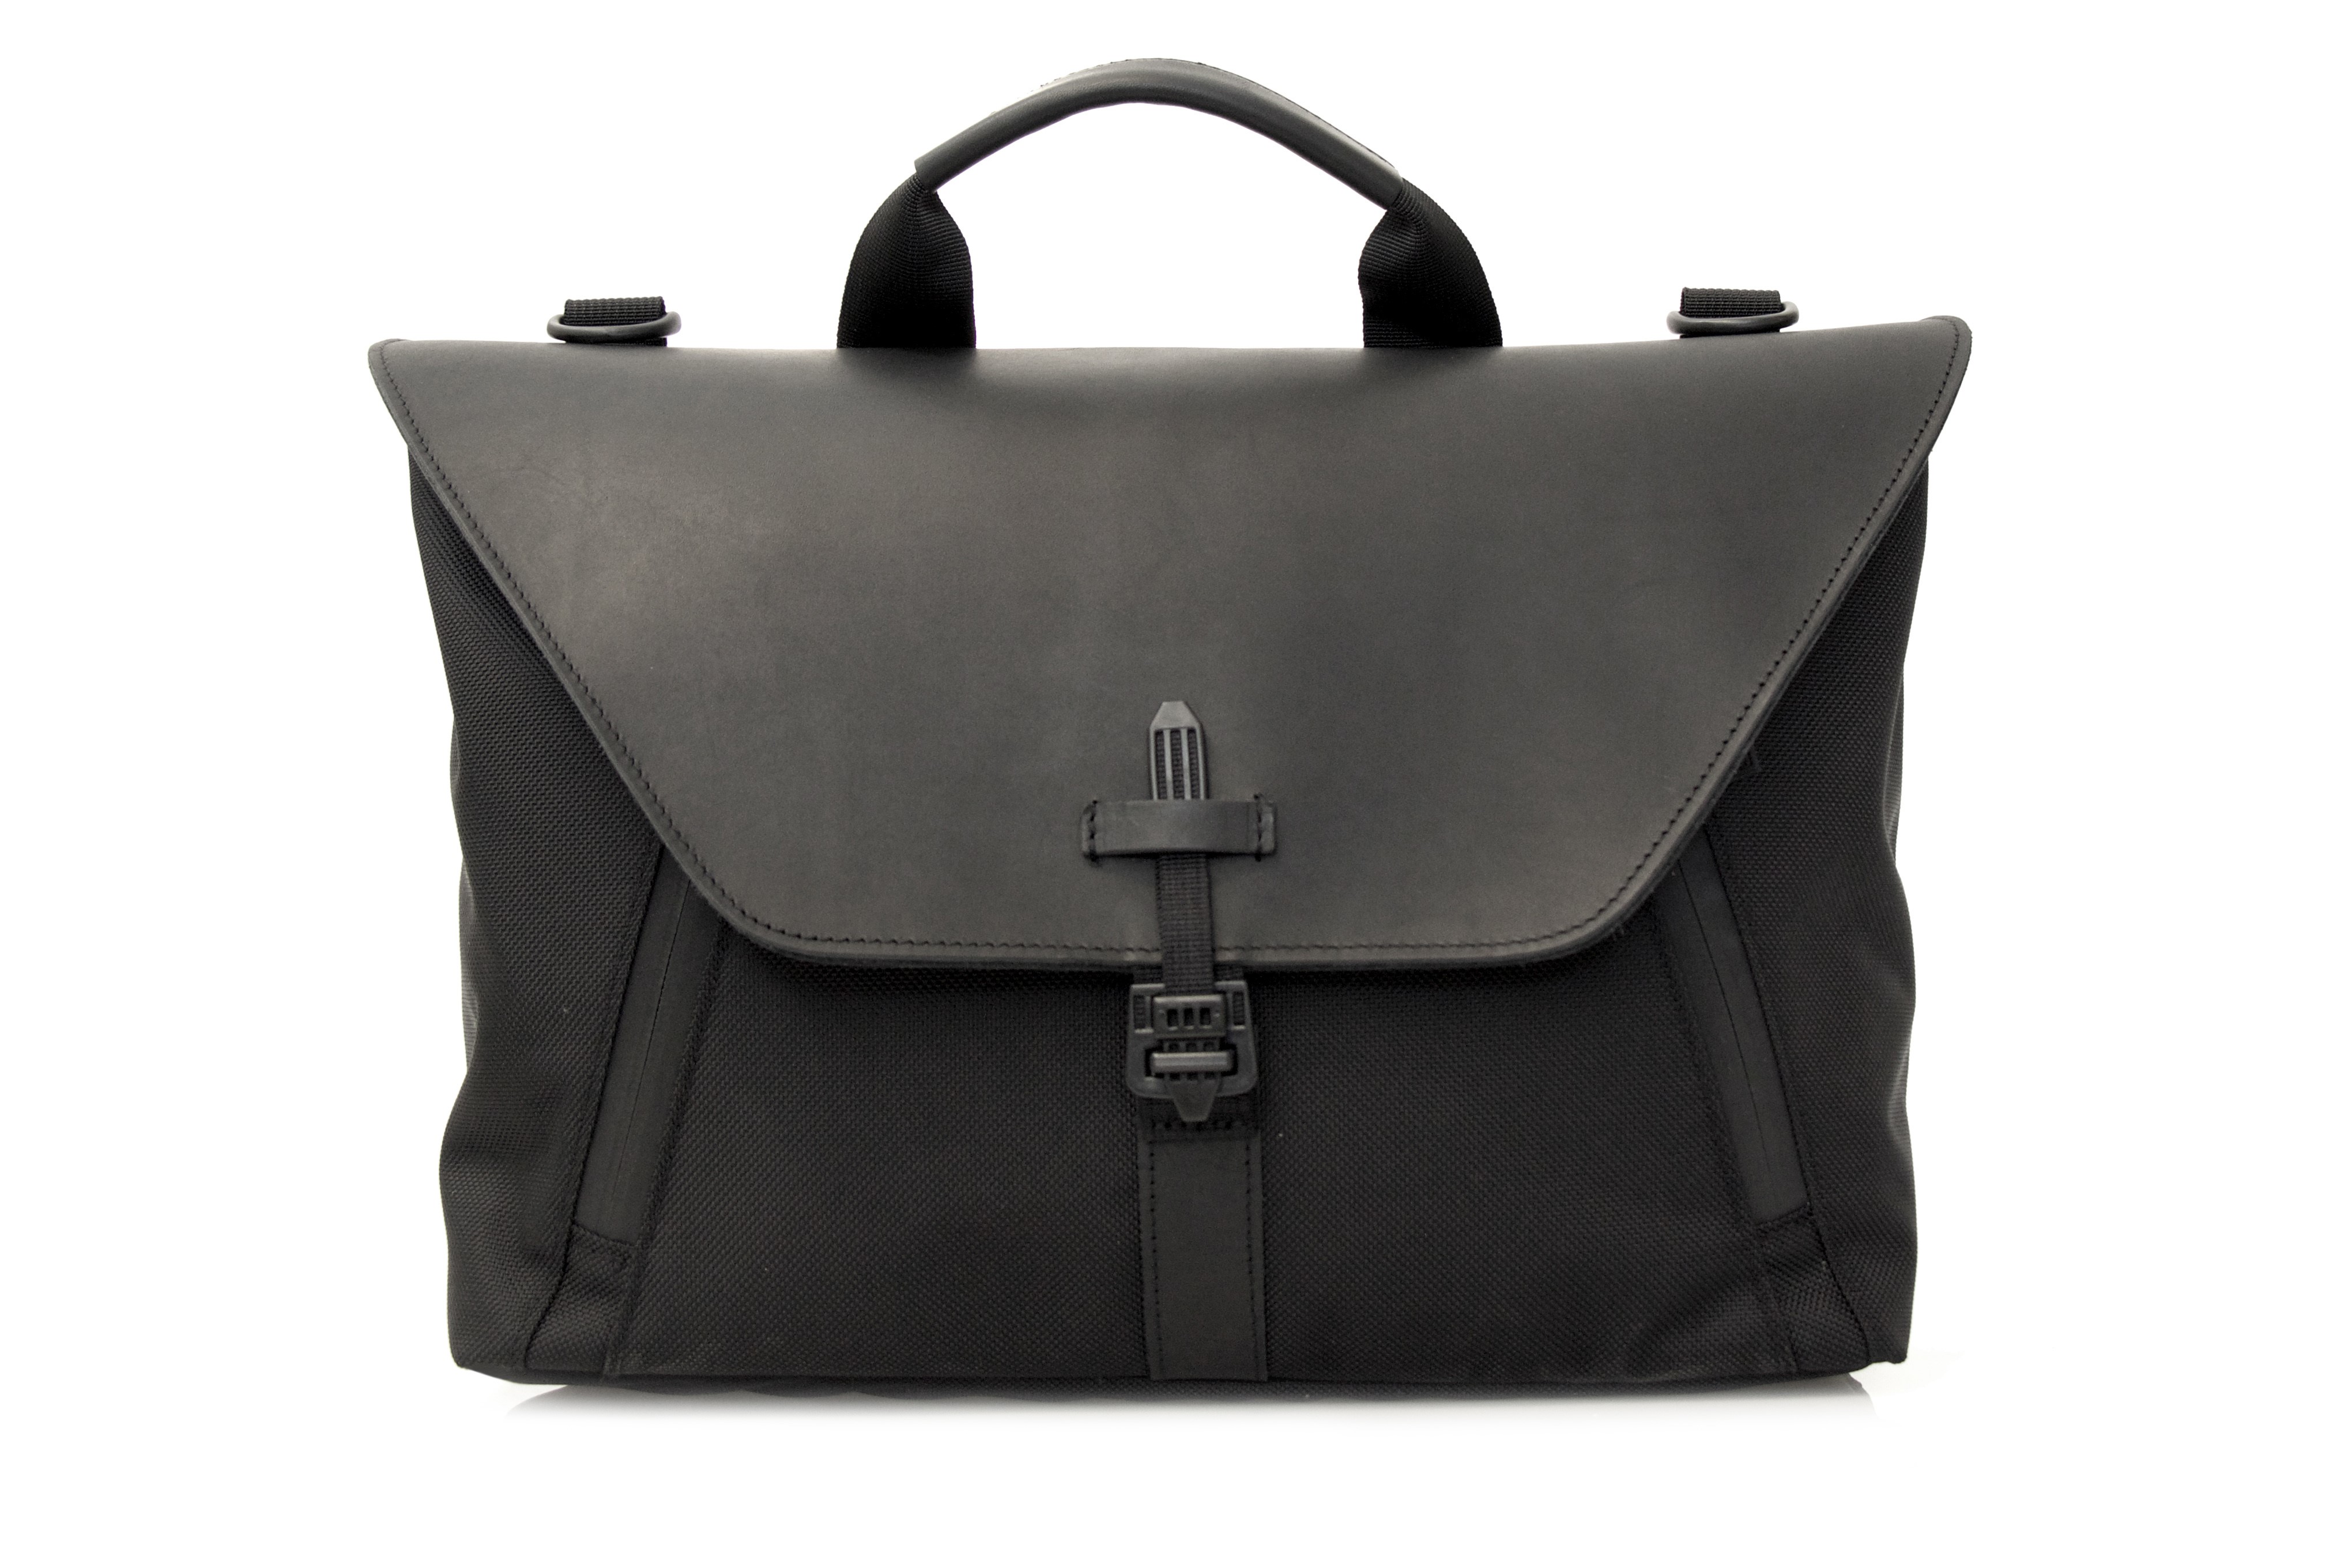 Staad Attaché —black ballistic nylon with black leather flap option